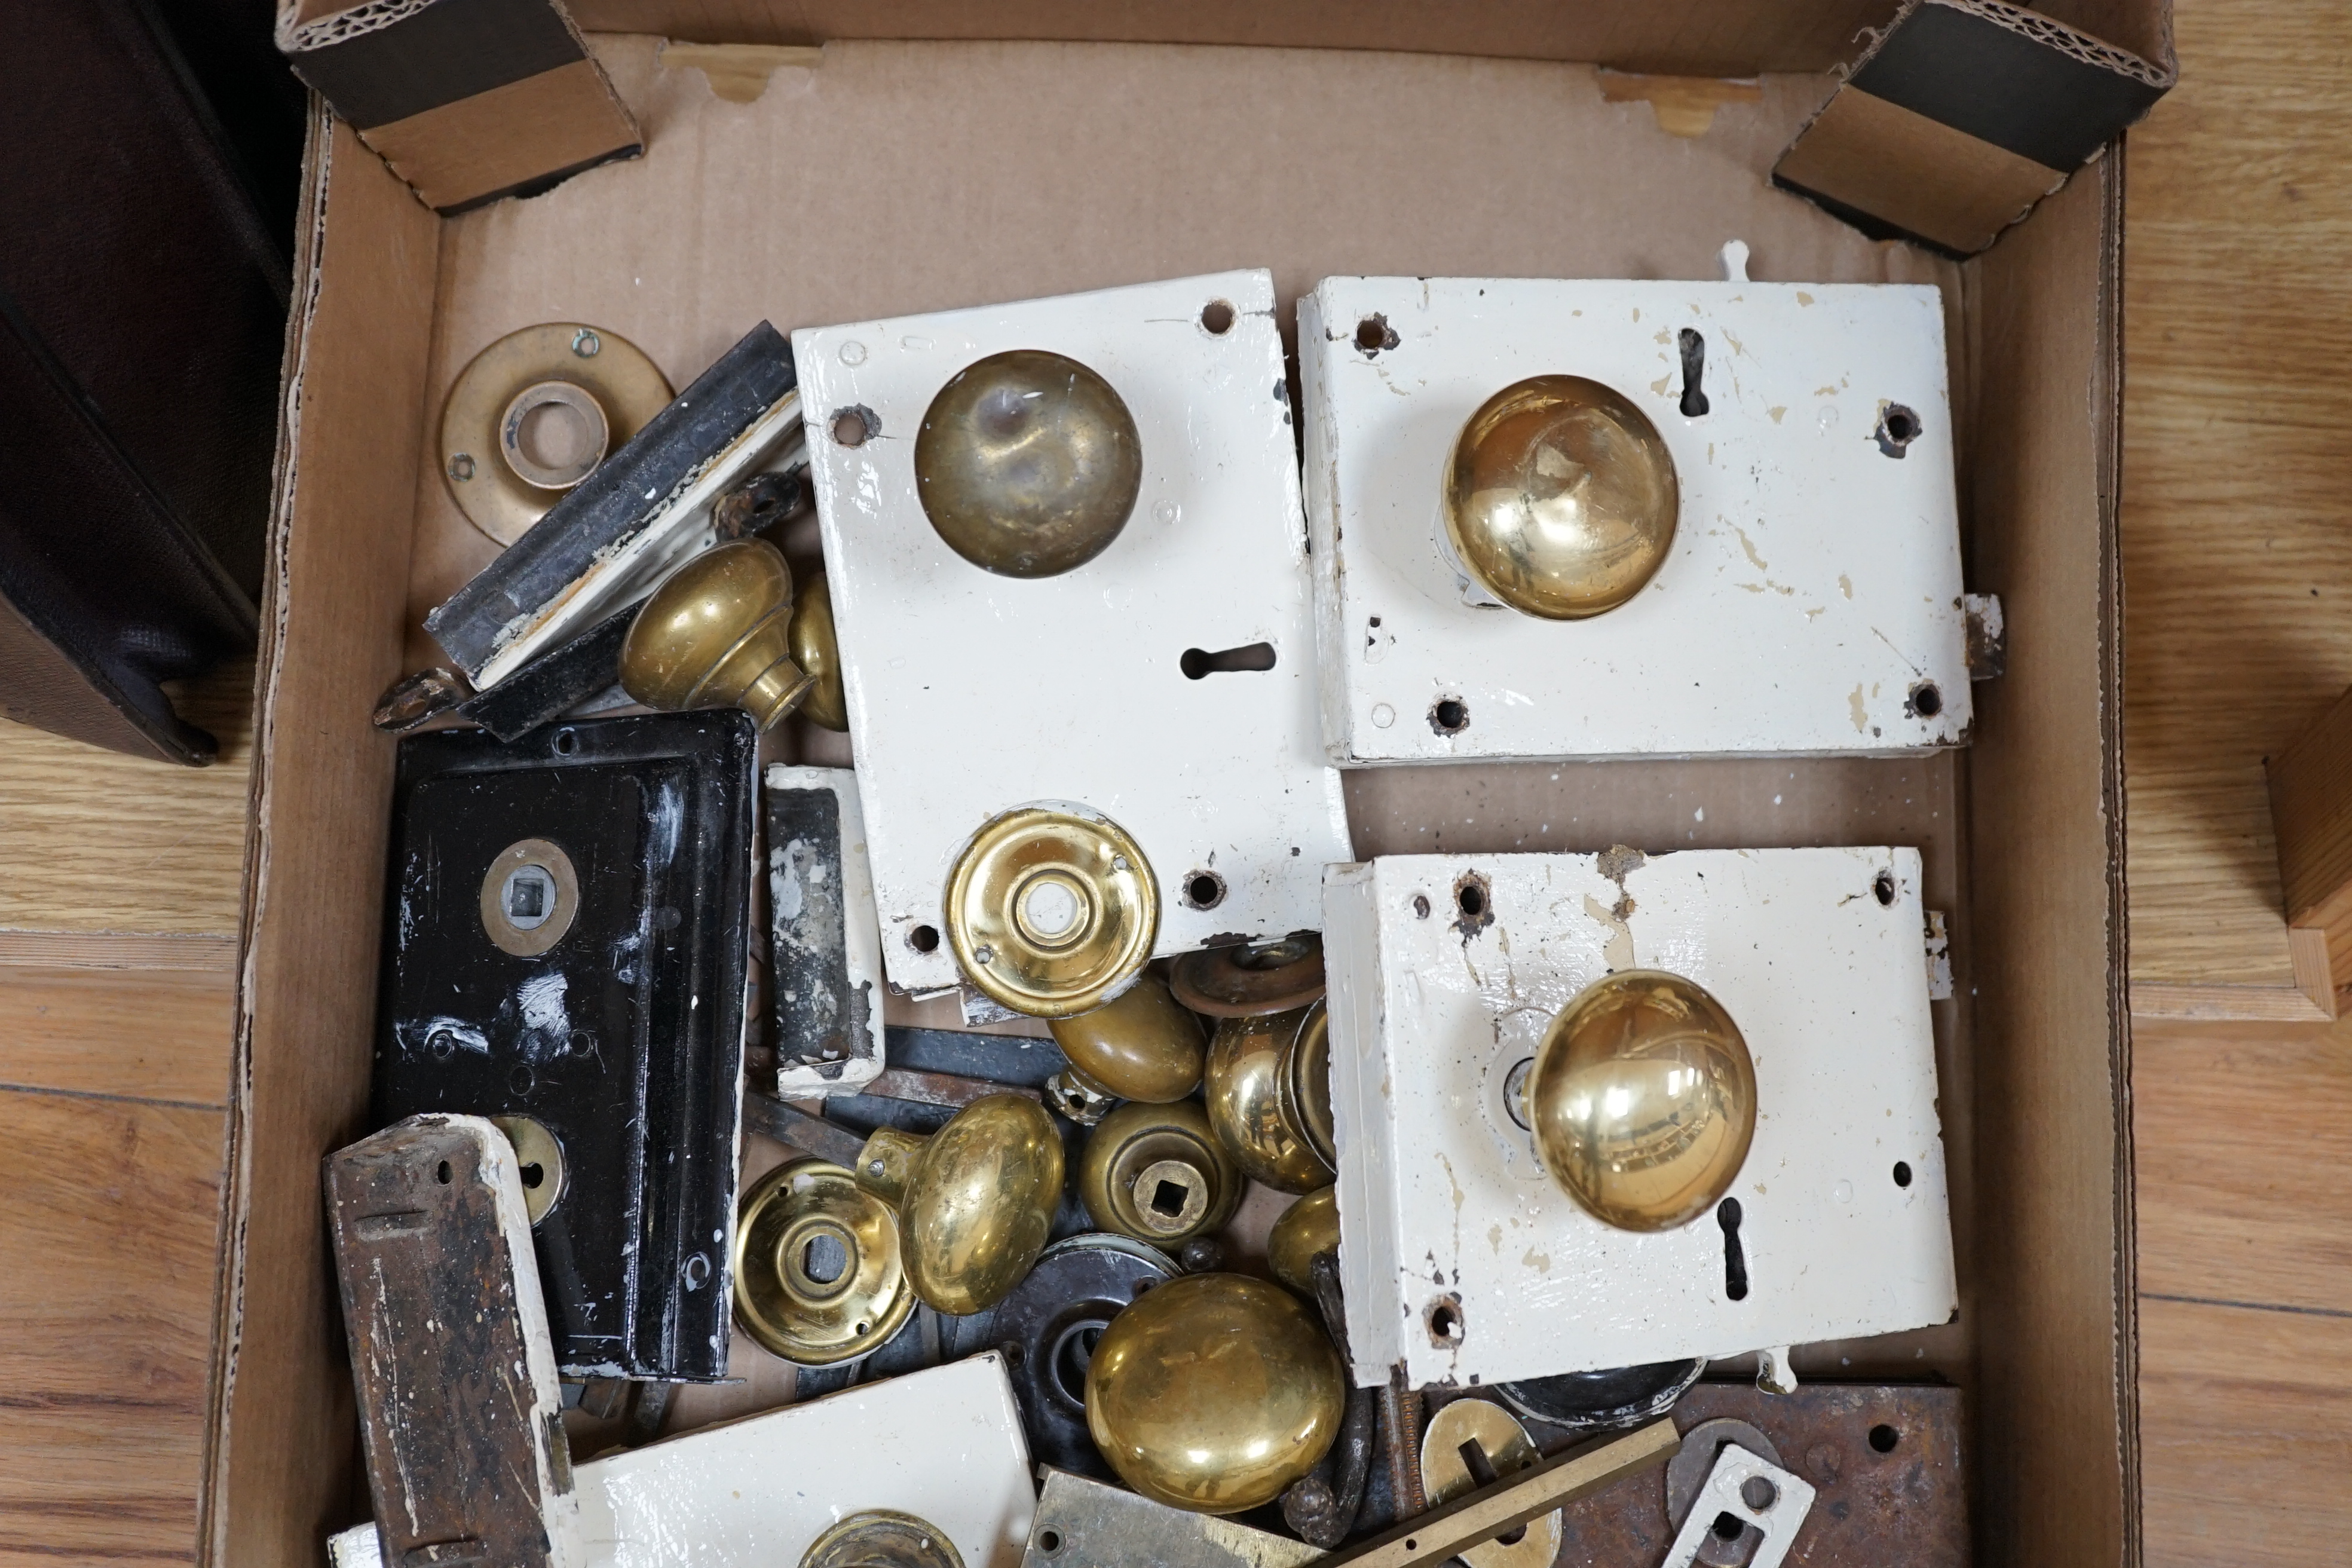 A collection of door locks and brass knobs